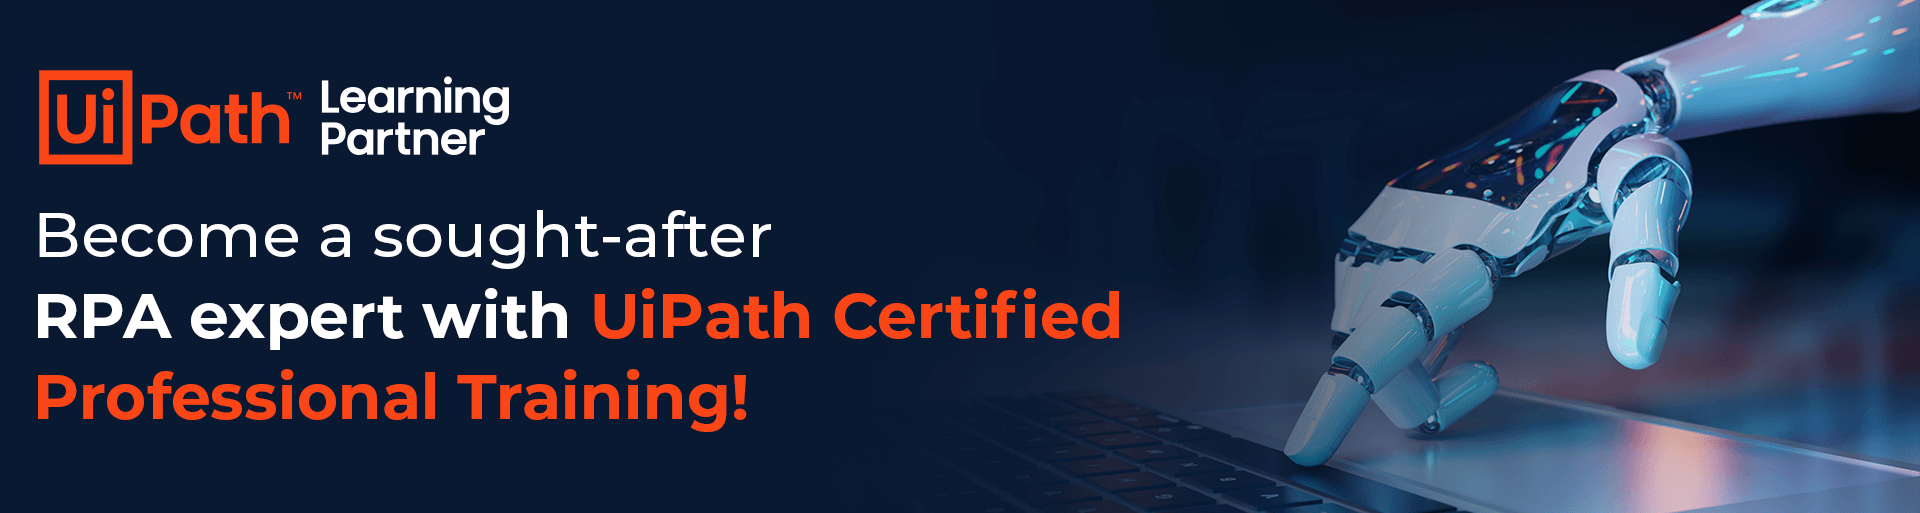 uipath-rpa-certification-page-banner-india